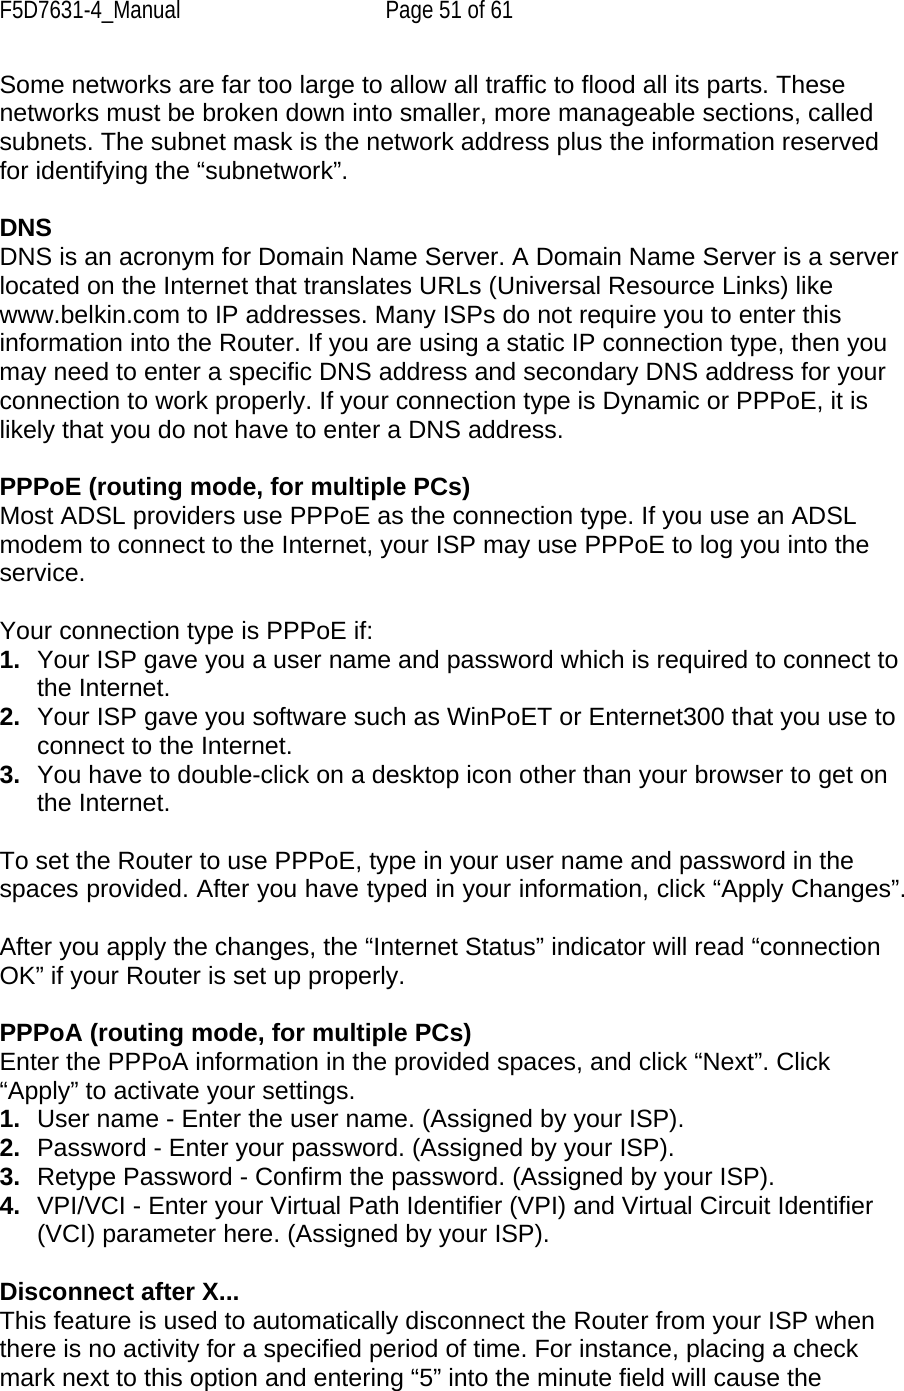 F5D7631-4_Manual  Page 51 of 61 Some networks are far too large to allow all traffic to flood all its parts. These networks must be broken down into smaller, more manageable sections, called subnets. The subnet mask is the network address plus the information reserved for identifying the “subnetwork”.  DNS DNS is an acronym for Domain Name Server. A Domain Name Server is a server located on the Internet that translates URLs (Universal Resource Links) like www.belkin.com to IP addresses. Many ISPs do not require you to enter this information into the Router. If you are using a static IP connection type, then you may need to enter a specific DNS address and secondary DNS address for your connection to work properly. If your connection type is Dynamic or PPPoE, it is likely that you do not have to enter a DNS address.  PPPoE (routing mode, for multiple PCs) Most ADSL providers use PPPoE as the connection type. If you use an ADSL modem to connect to the Internet, your ISP may use PPPoE to log you into the service.  Your connection type is PPPoE if: 1.  Your ISP gave you a user name and password which is required to connect to the Internet. 2.  Your ISP gave you software such as WinPoET or Enternet300 that you use to connect to the Internet. 3.  You have to double-click on a desktop icon other than your browser to get on the Internet.  To set the Router to use PPPoE, type in your user name and password in the spaces provided. After you have typed in your information, click “Apply Changes”.  After you apply the changes, the “Internet Status” indicator will read “connection OK” if your Router is set up properly.  PPPoA (routing mode, for multiple PCs) Enter the PPPoA information in the provided spaces, and click “Next”. Click “Apply” to activate your settings. 1.  User name - Enter the user name. (Assigned by your ISP). 2.  Password - Enter your password. (Assigned by your ISP). 3.  Retype Password - Confirm the password. (Assigned by your ISP). 4.  VPI/VCI - Enter your Virtual Path Identifier (VPI) and Virtual Circuit Identifier (VCI) parameter here. (Assigned by your ISP).  Disconnect after X... This feature is used to automatically disconnect the Router from your ISP when there is no activity for a specified period of time. For instance, placing a check mark next to this option and entering “5” into the minute field will cause the 